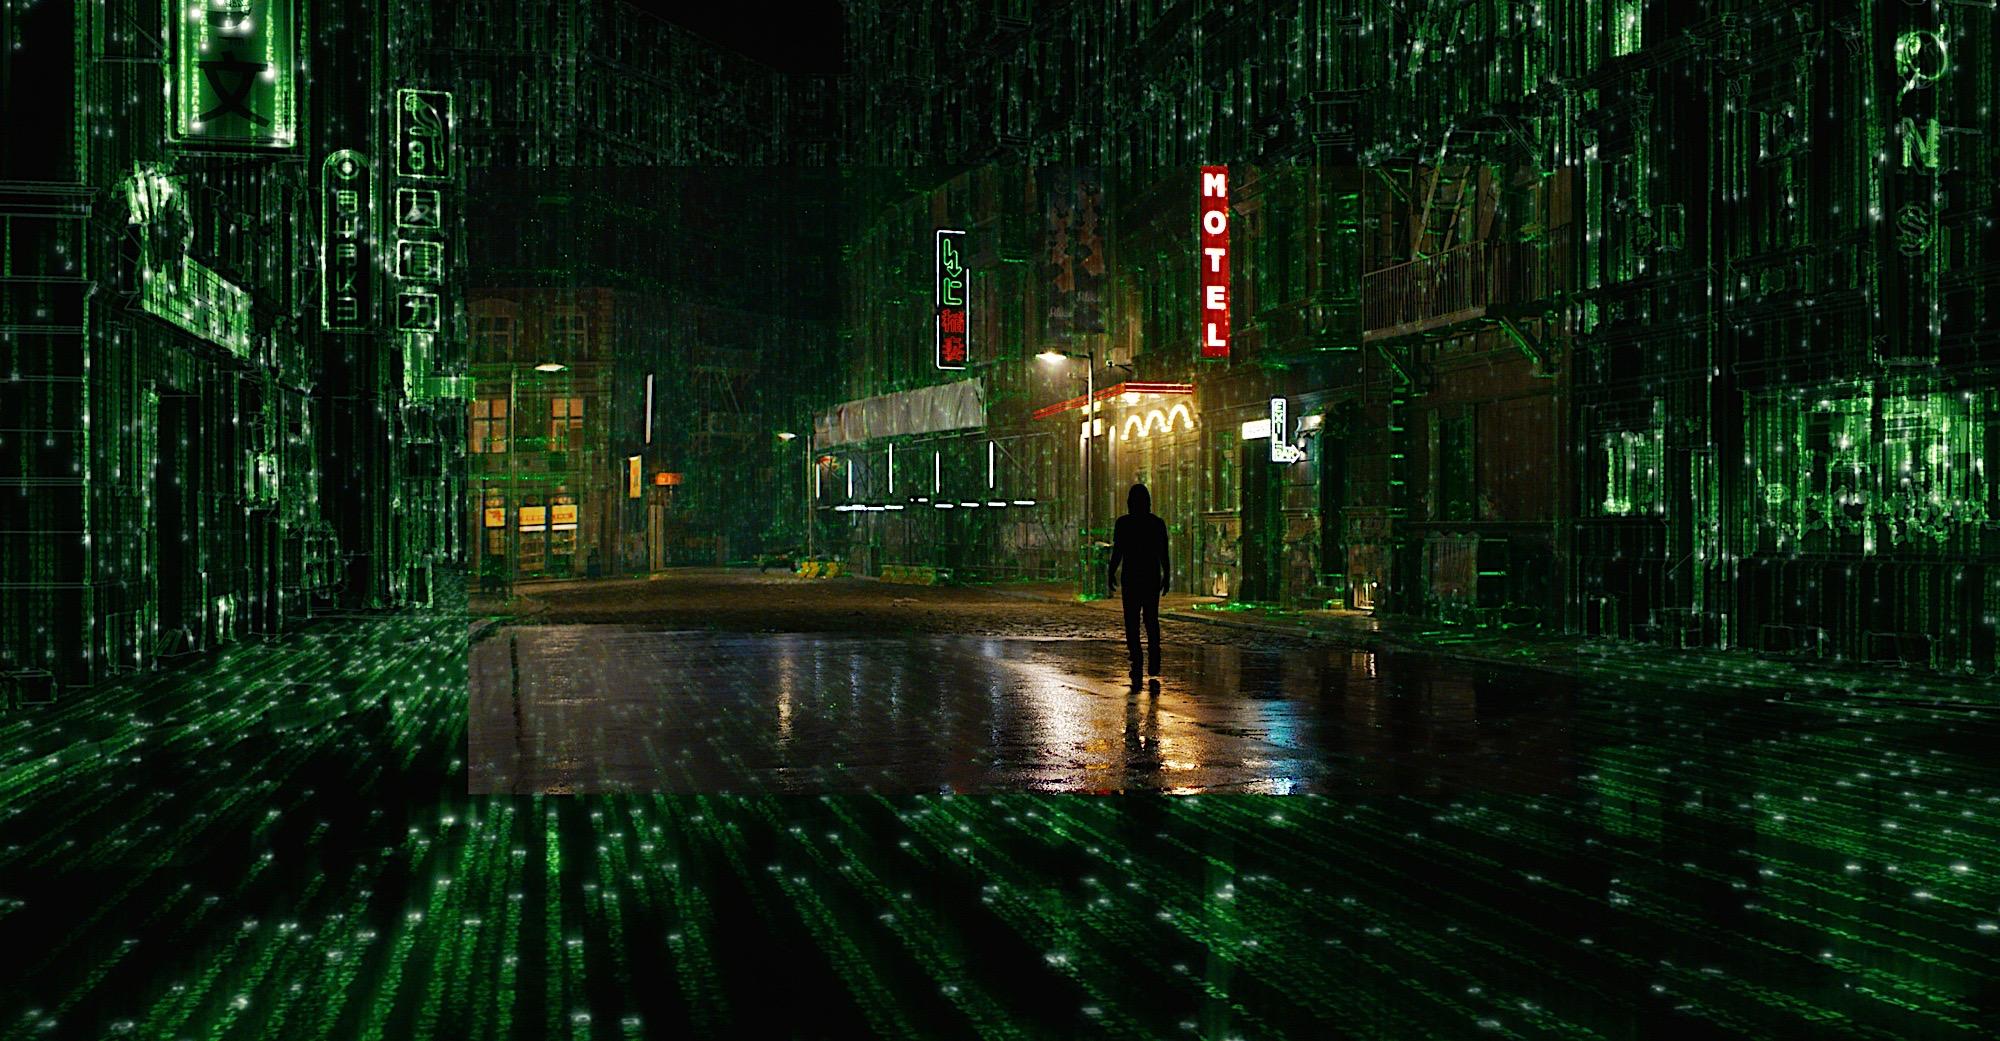 WarnerMedia in hot water for releasing The Matrix Resurrections on HBO Max